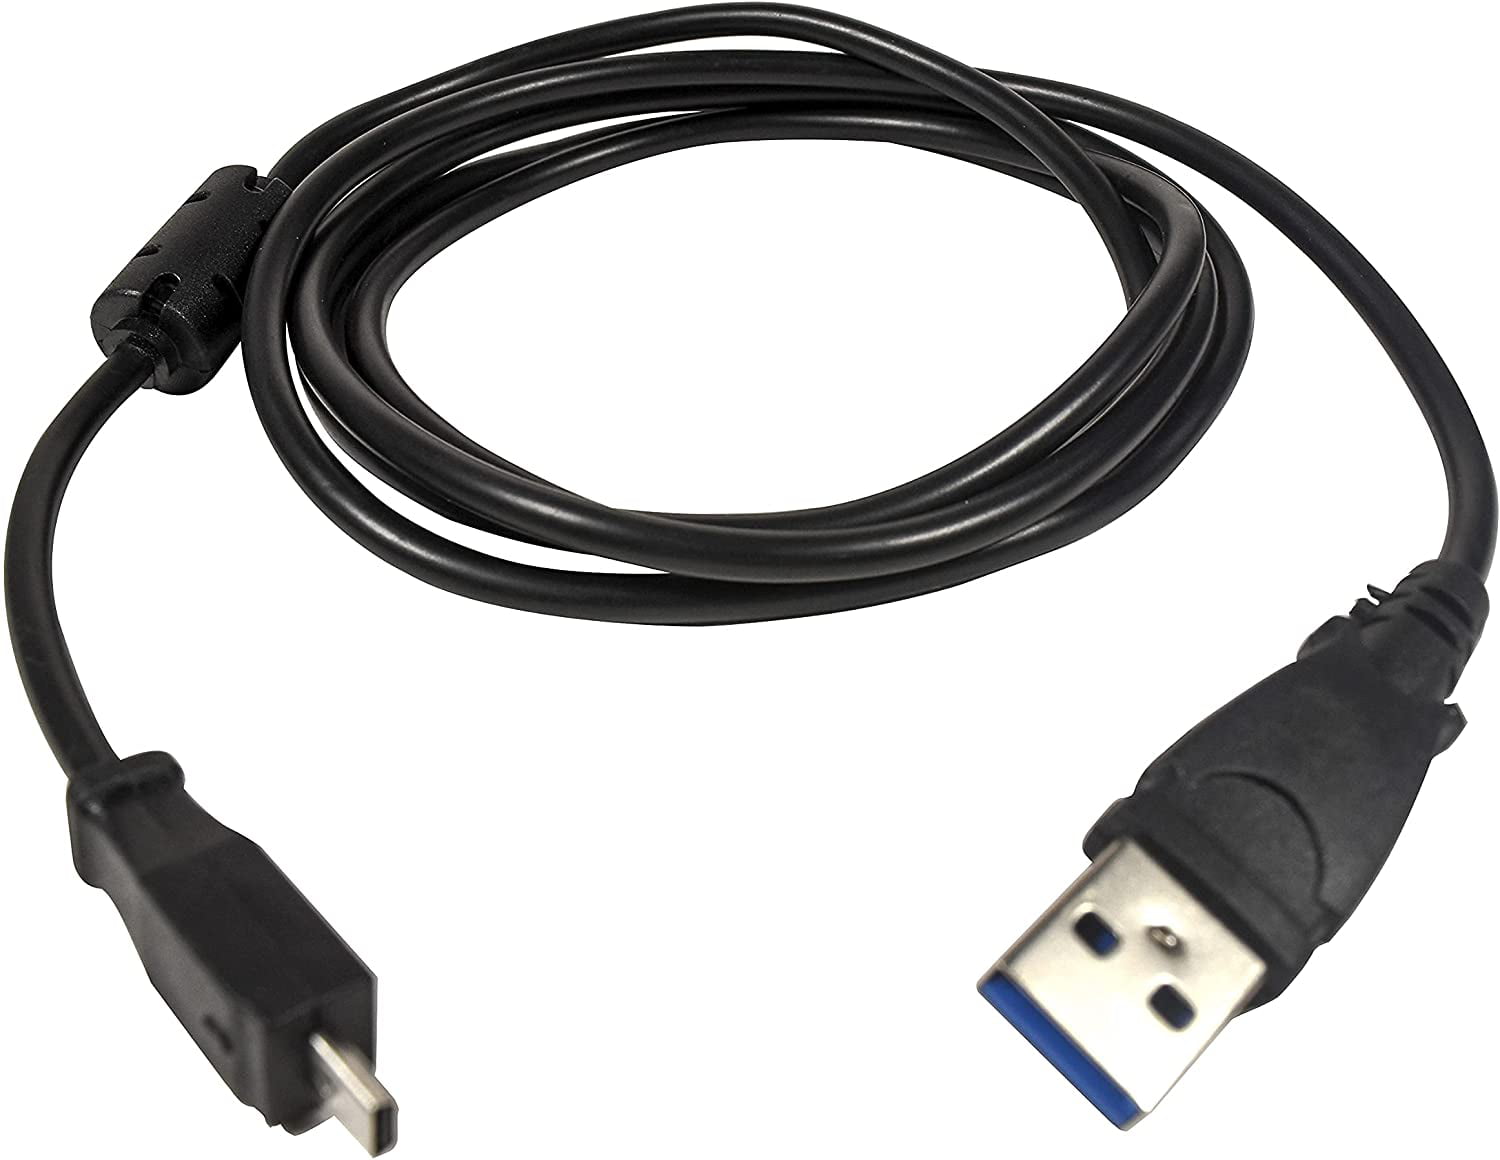 Length 1.5m ZQ House Digital Camera Cable for Olympus 